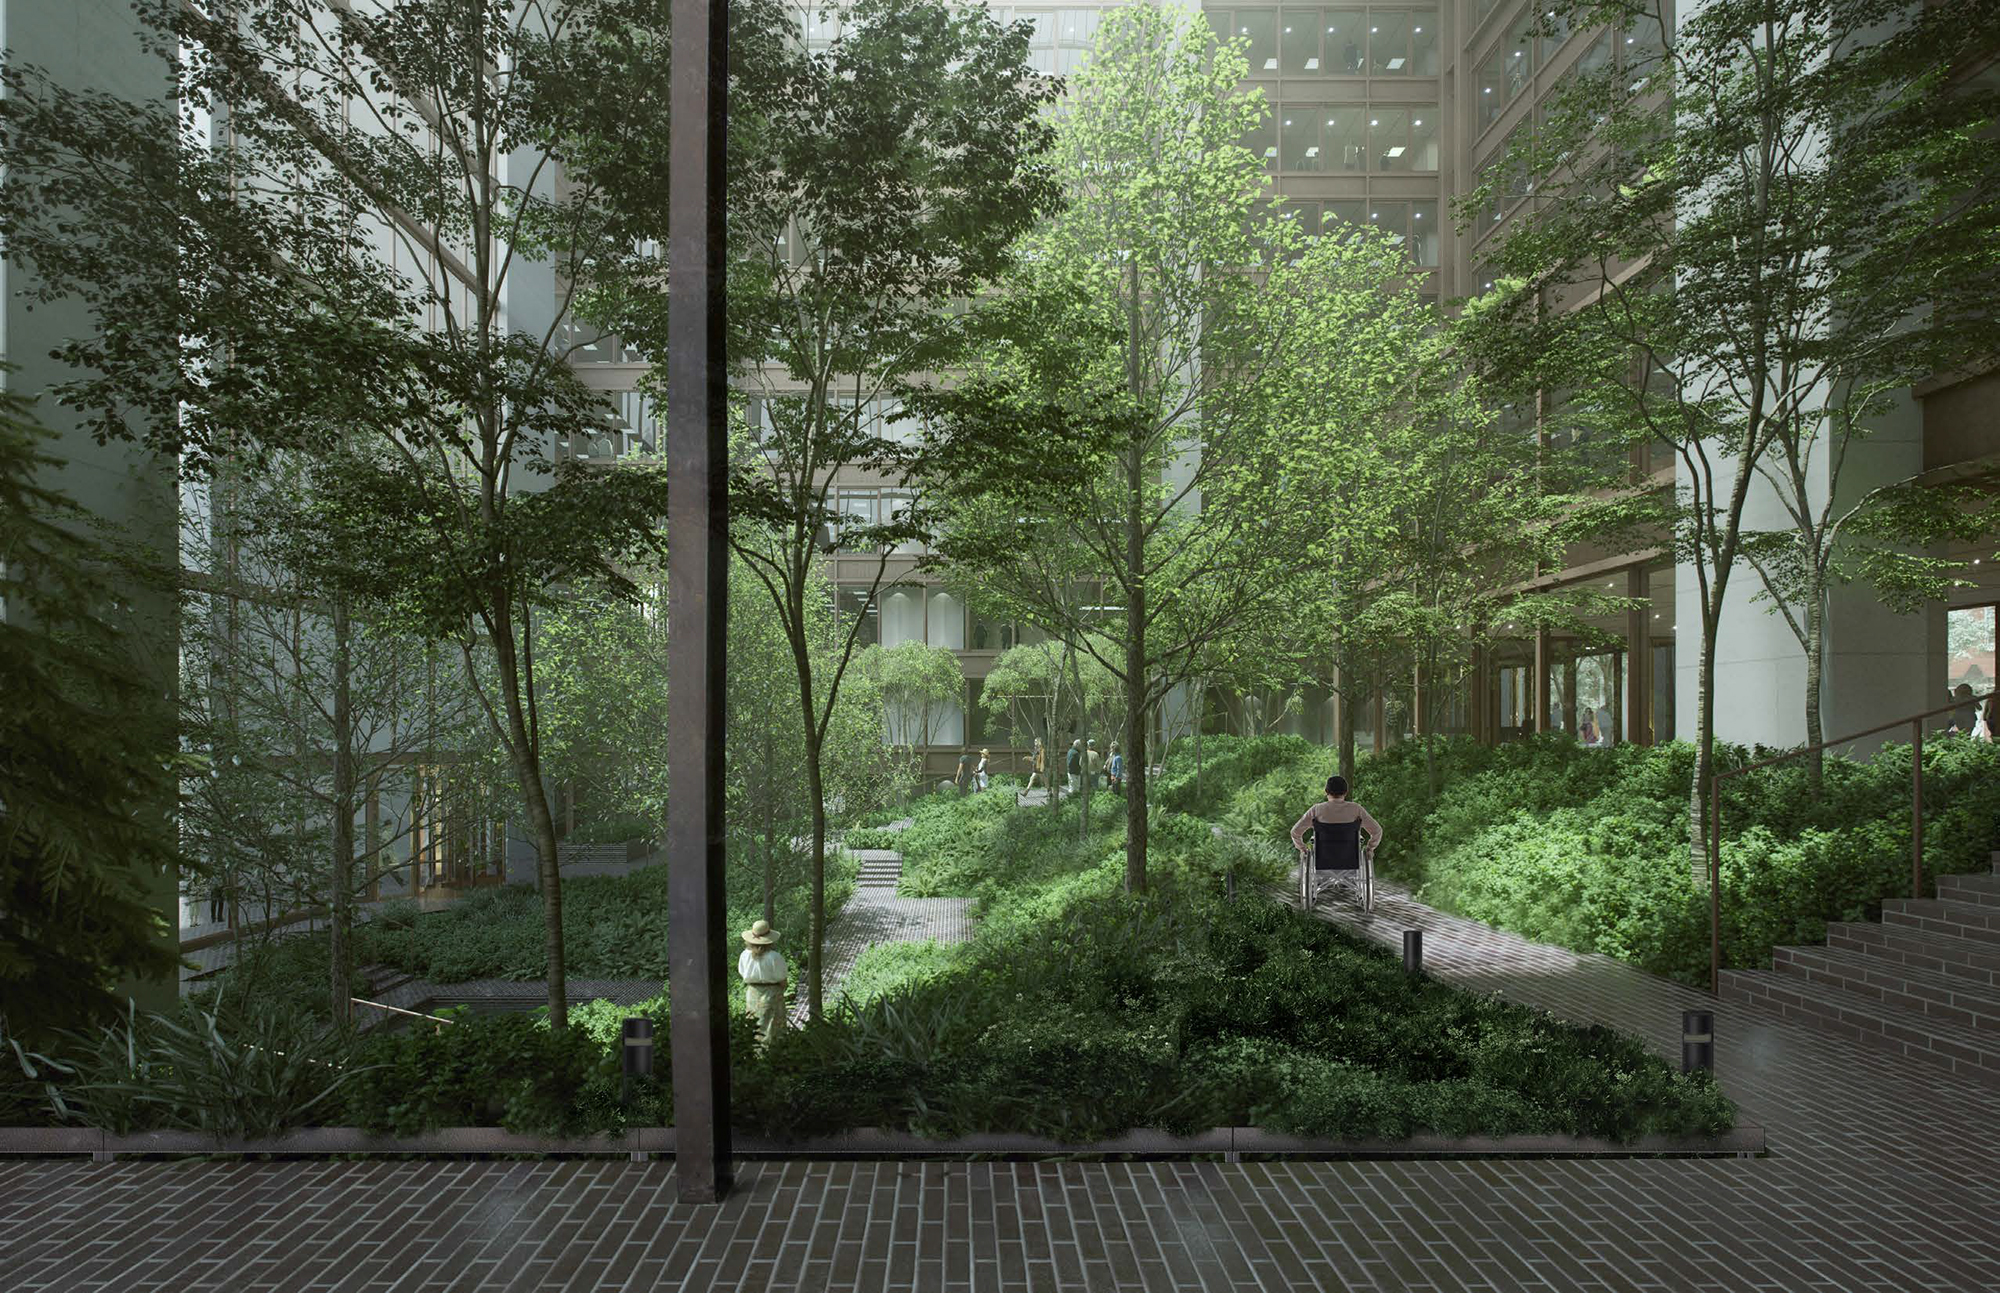 Proposed conditions at the Ford Foundation Building